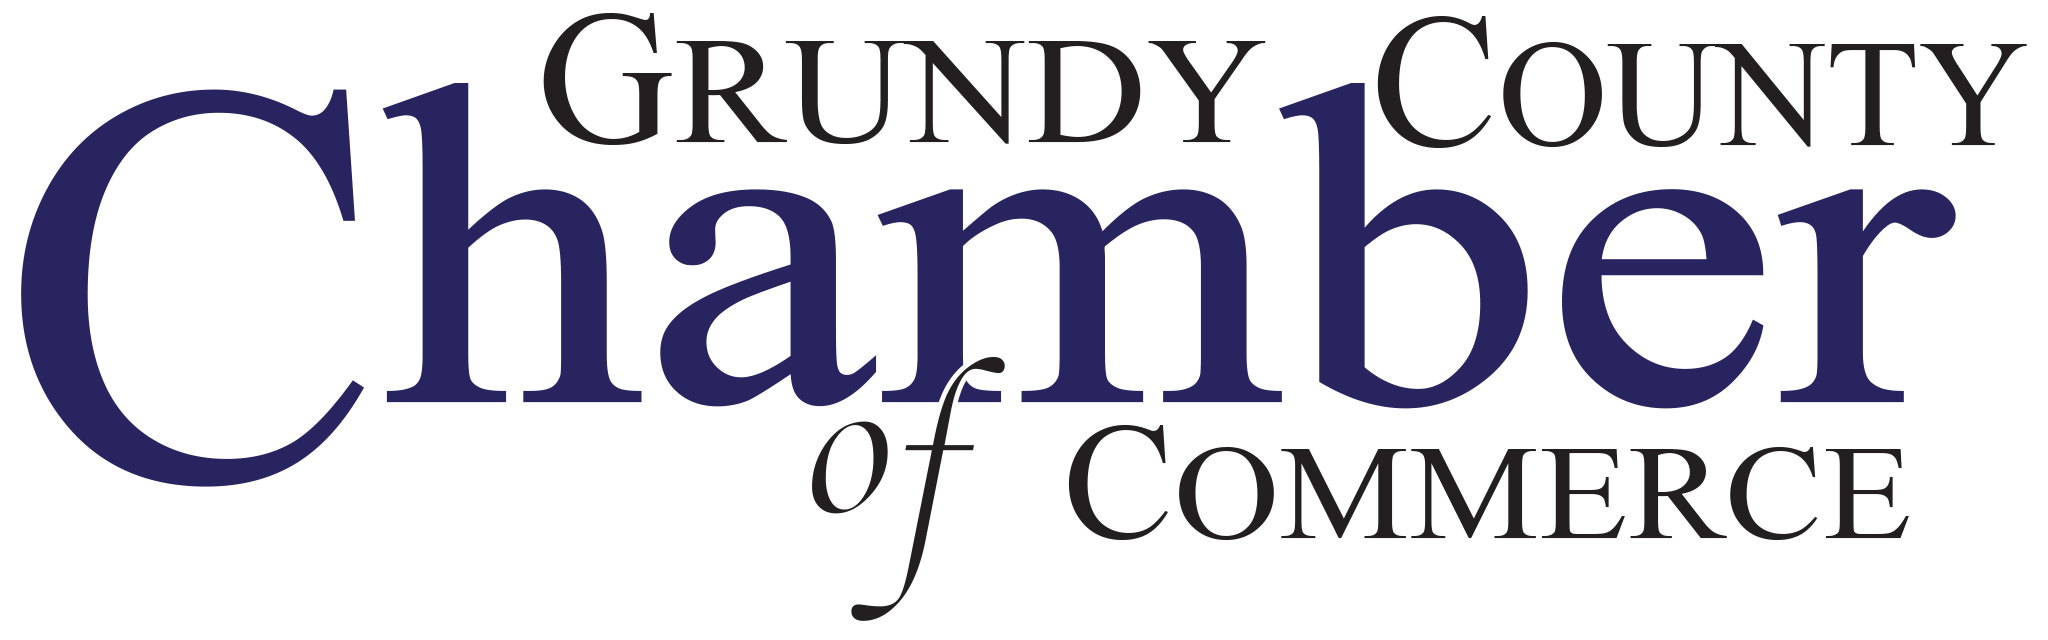 Grundy County Chamber of Commerce - Click here to visit Commerce Page